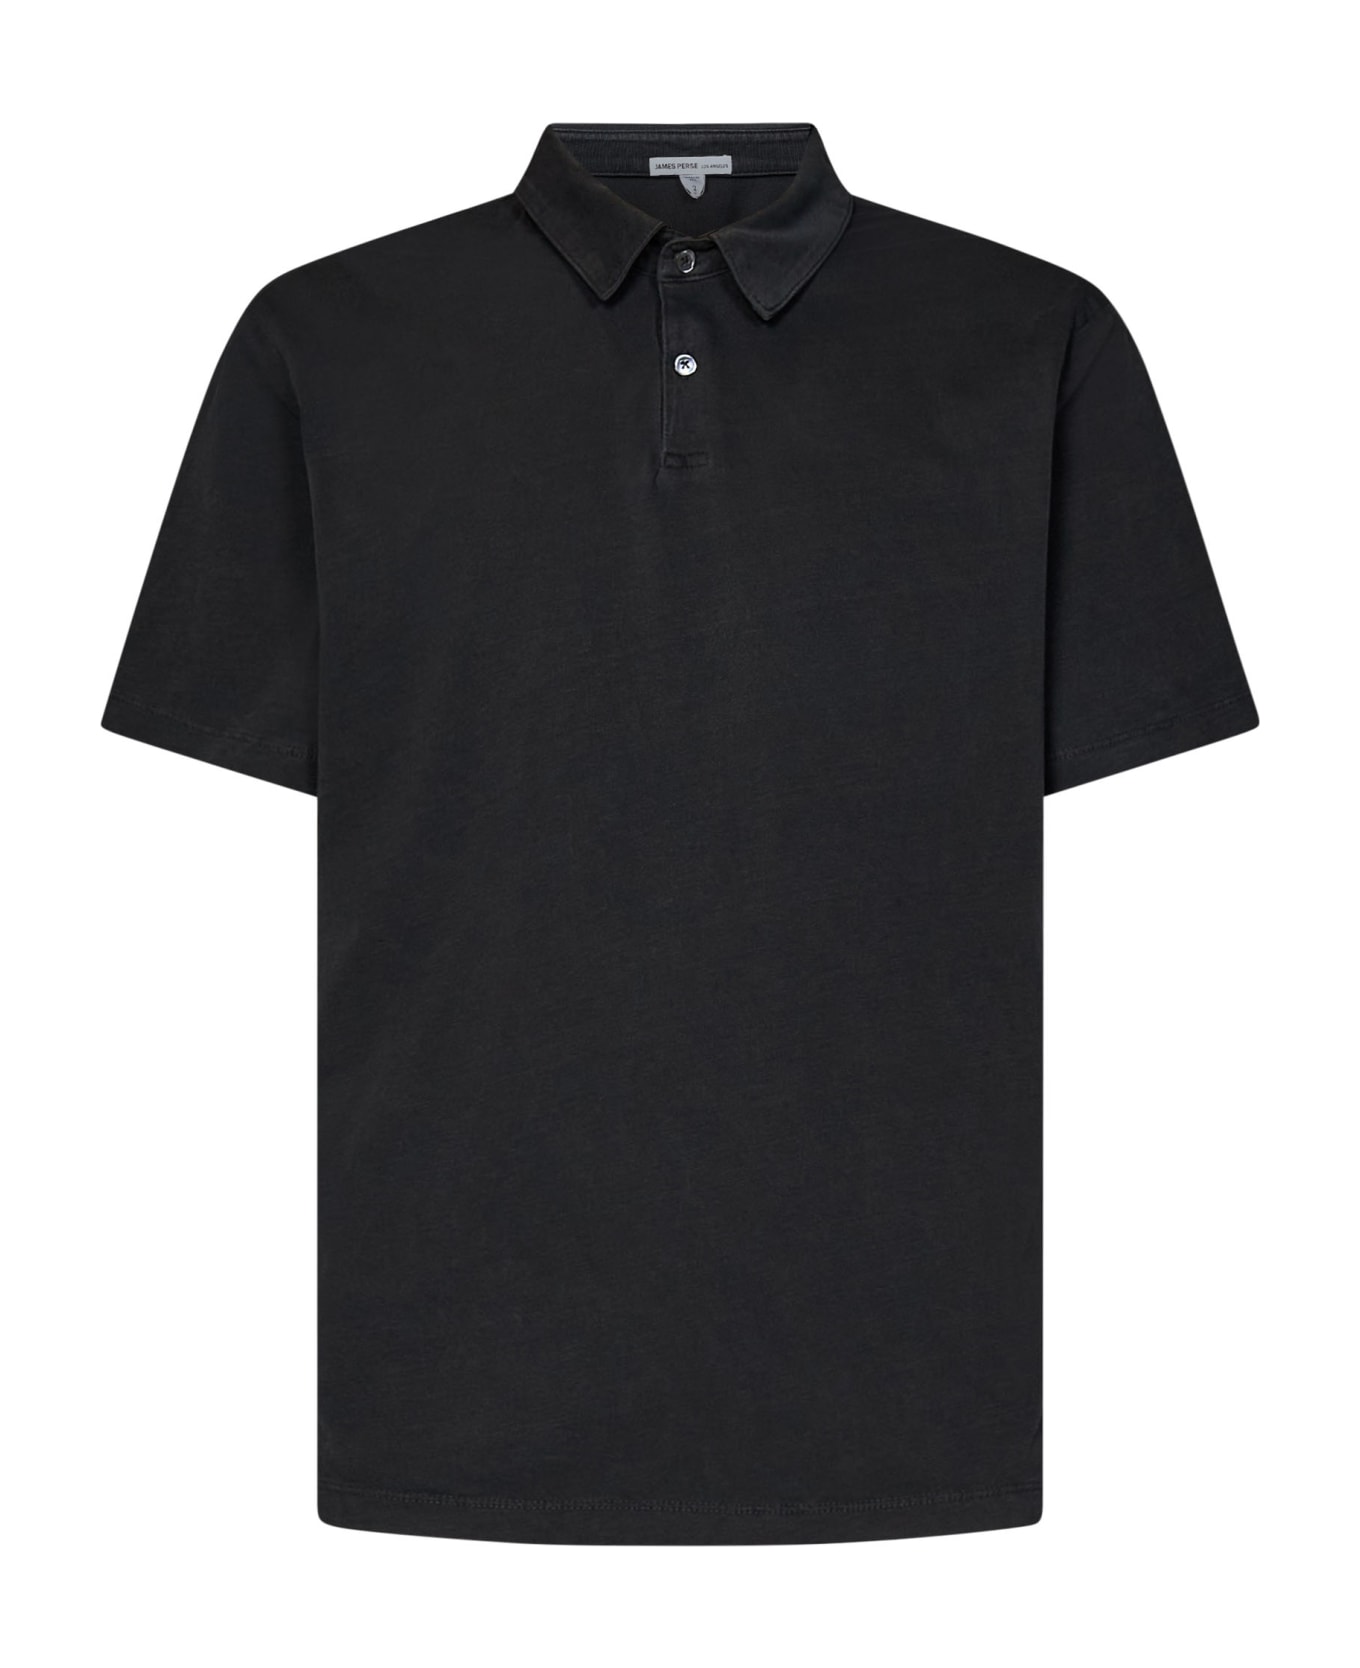 James Perse Polo Shirt - Carbone